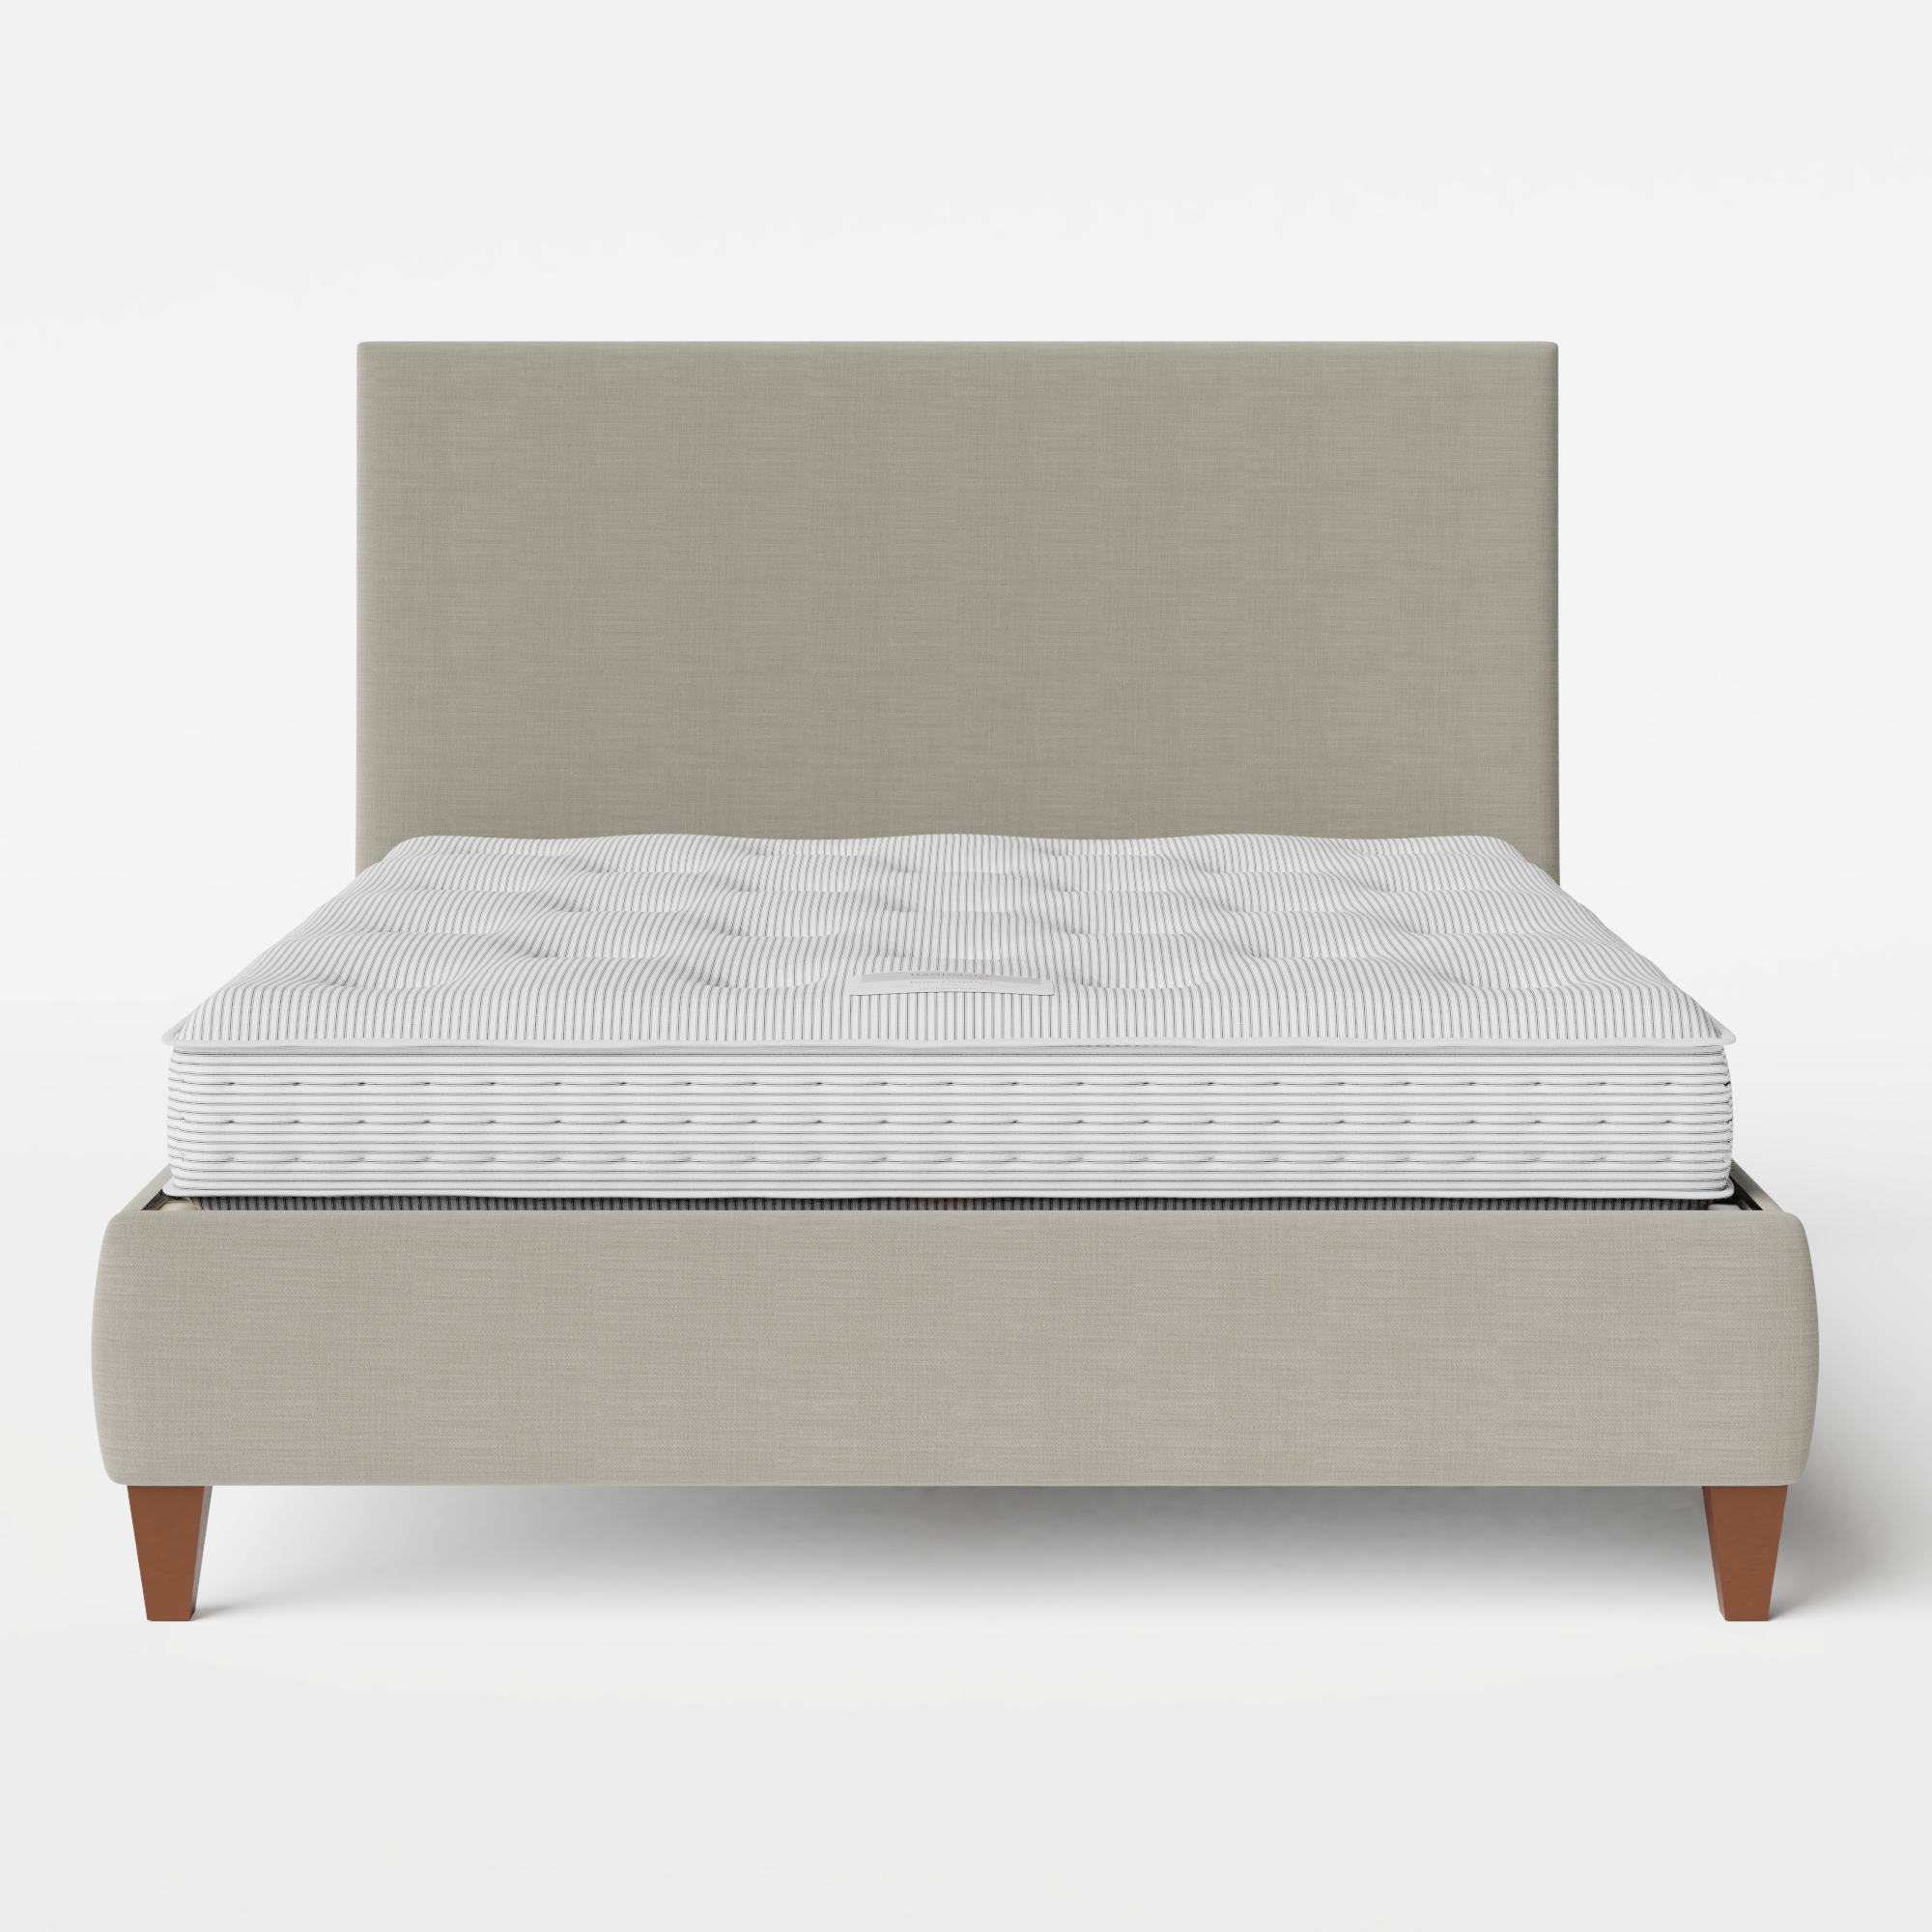 Yushan upholstered bed in grey fabric with Juno mattress